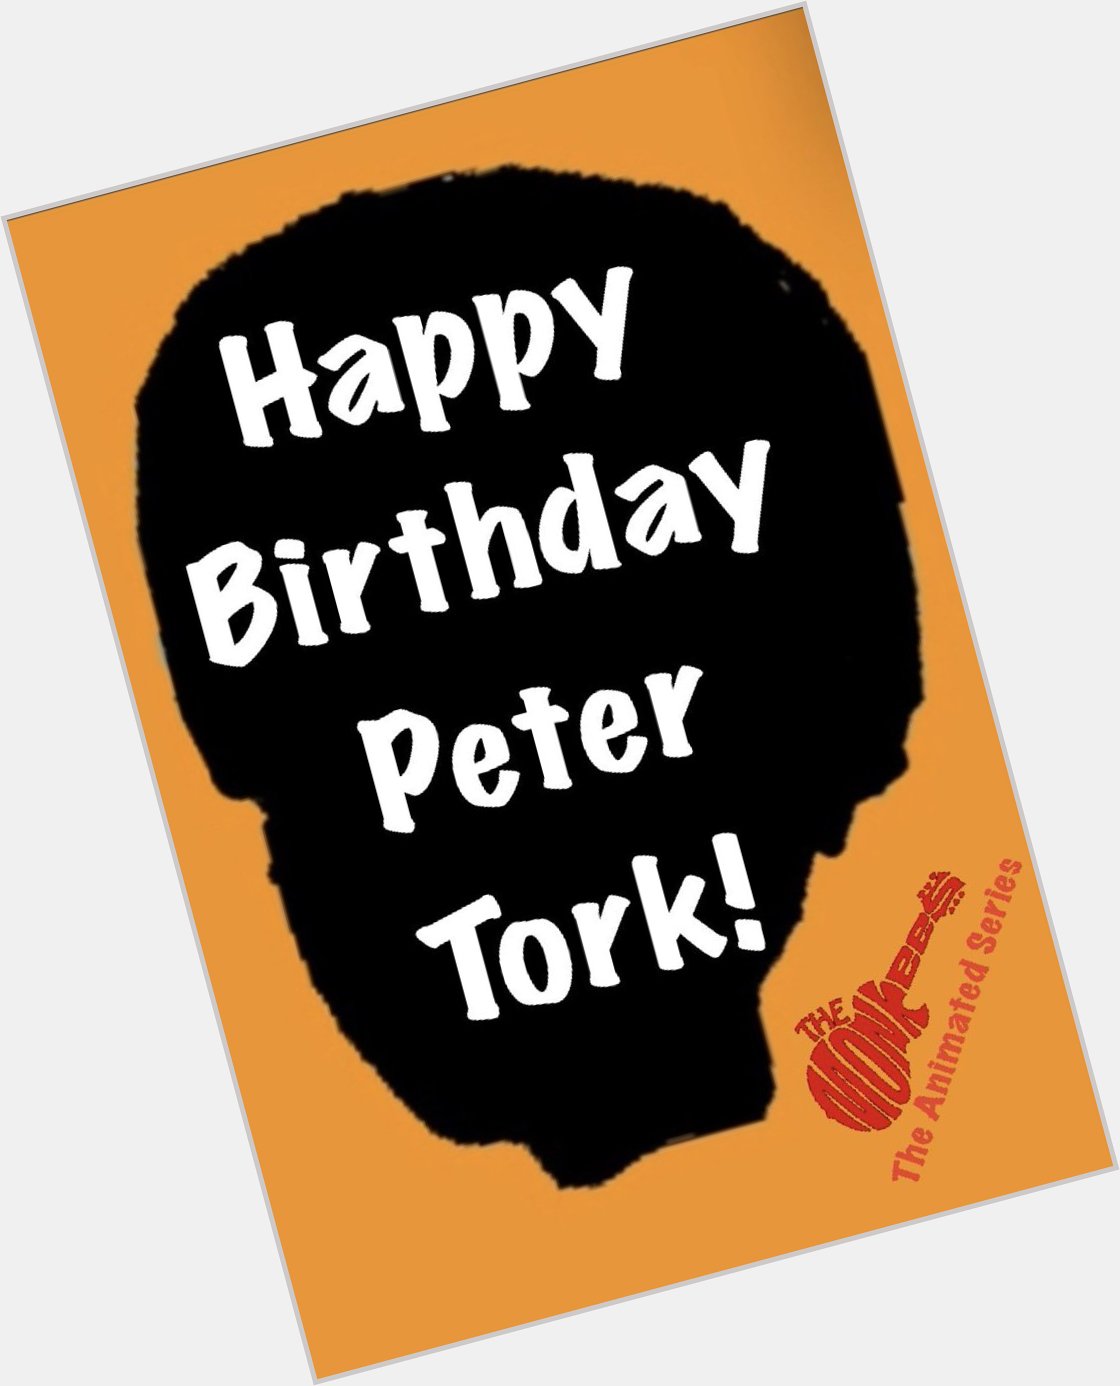 Happy Birthday to one of the members of the best TV show and group, Peter Tork!    